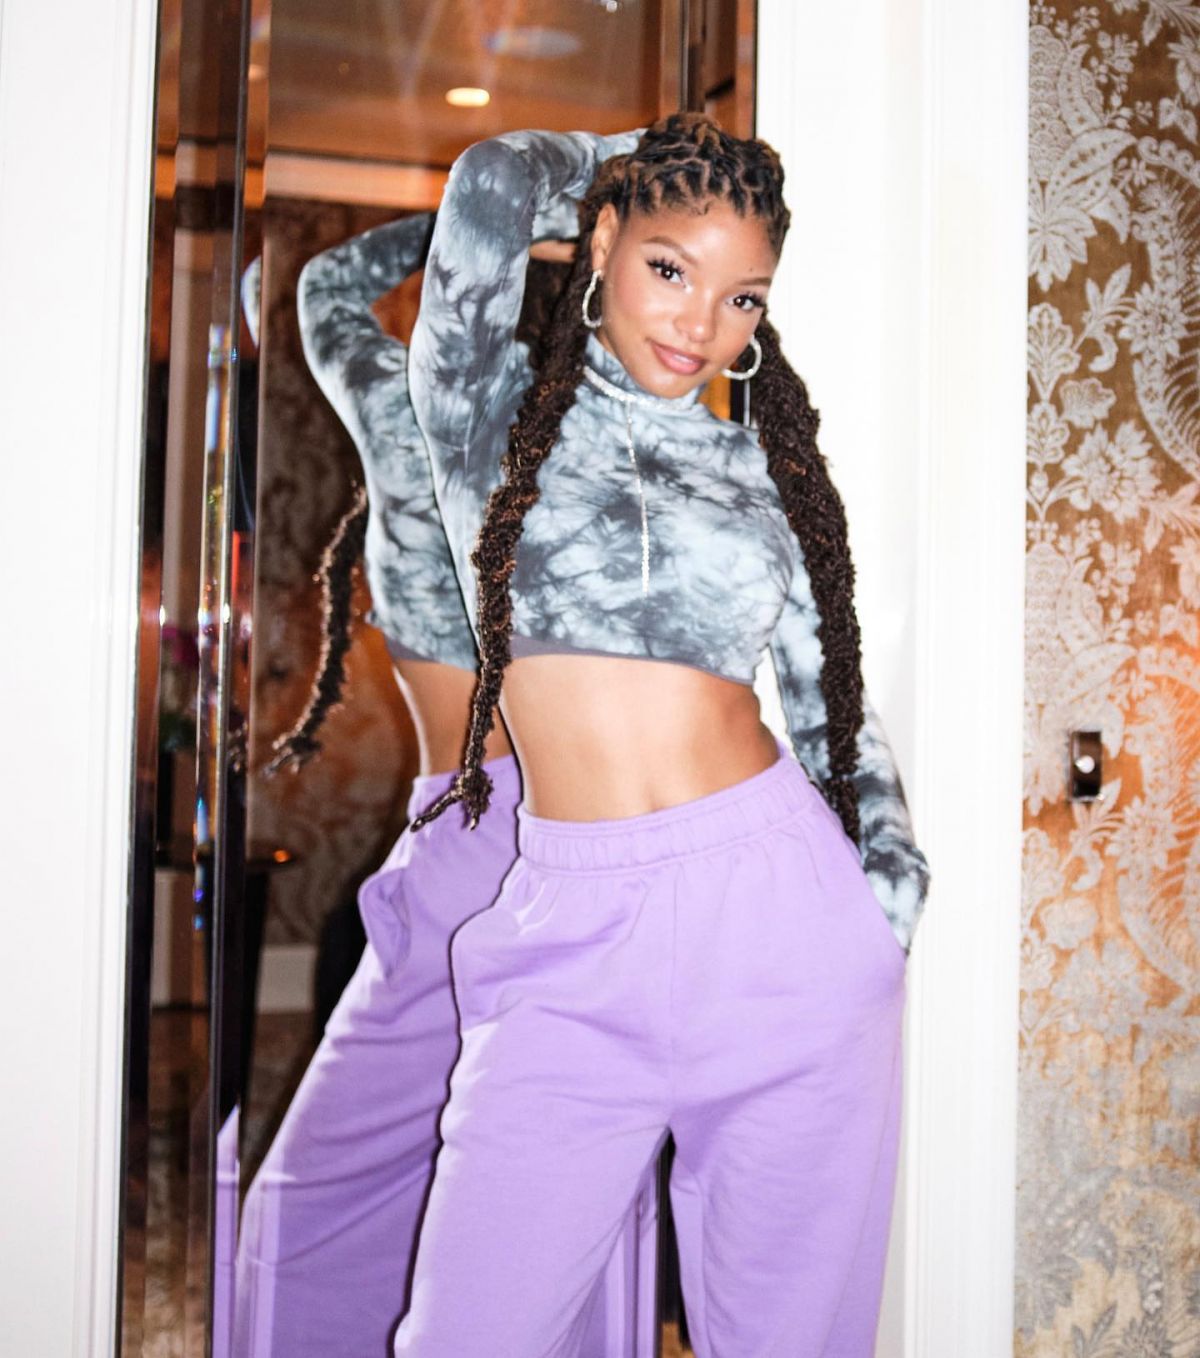 HALLE BAILEY at a Photoshoot, December 2021 – HawtCelebs